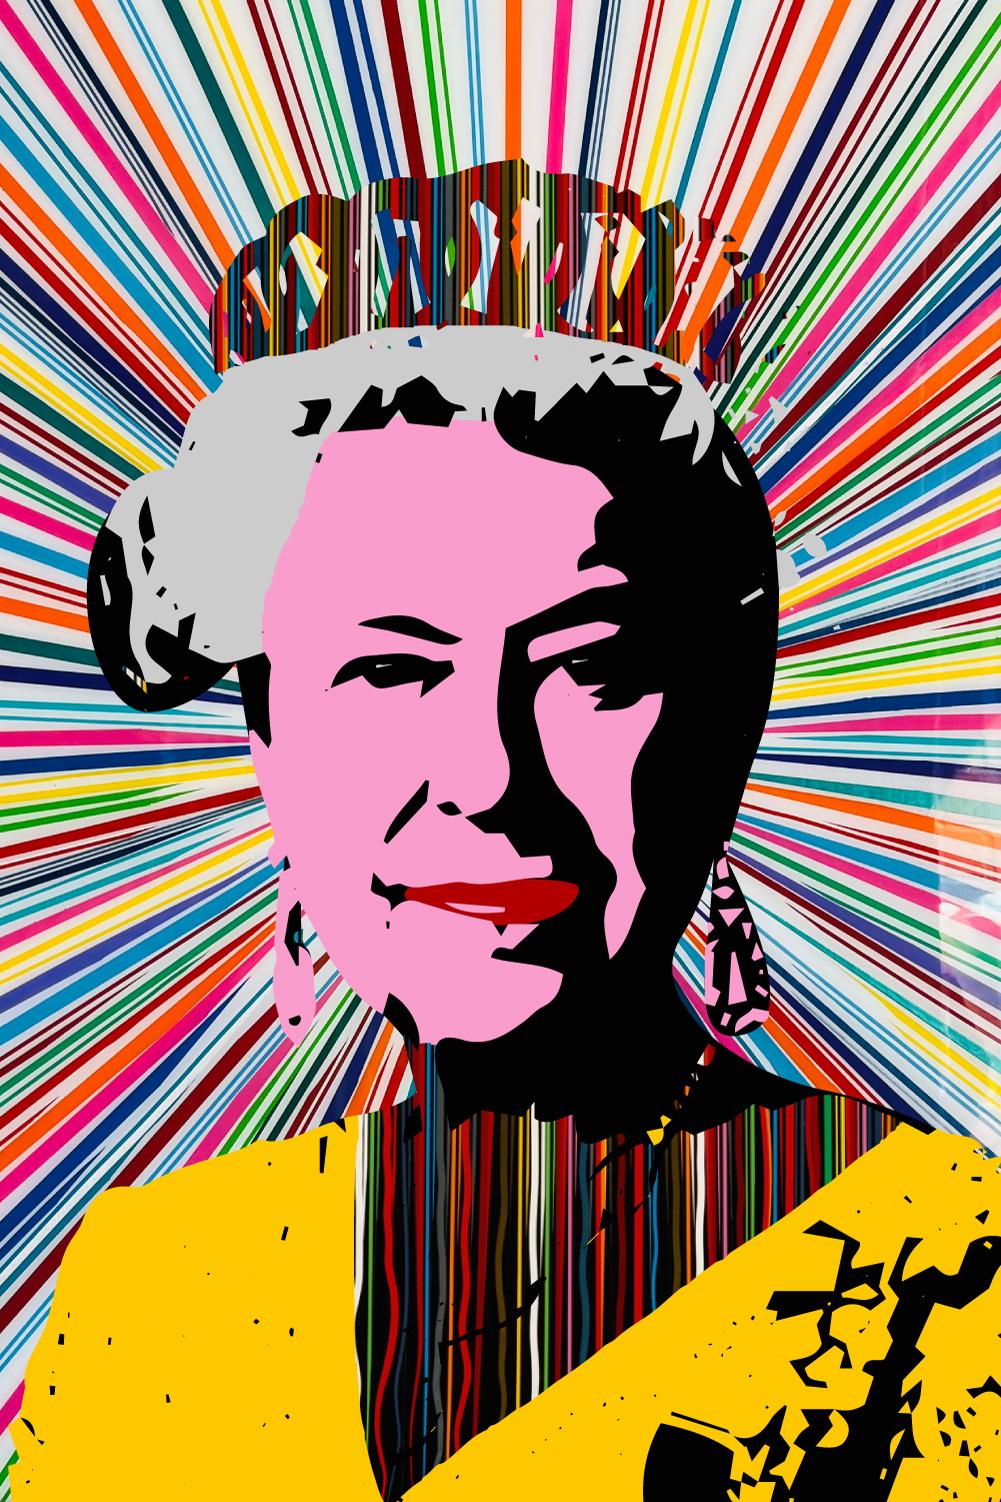 Mauro Oliveira Abstract Print - QUEEN OF QUEENS: A TRIBUTE TO ELIZABETH II (Limited Edition Of Only 30 Prints)